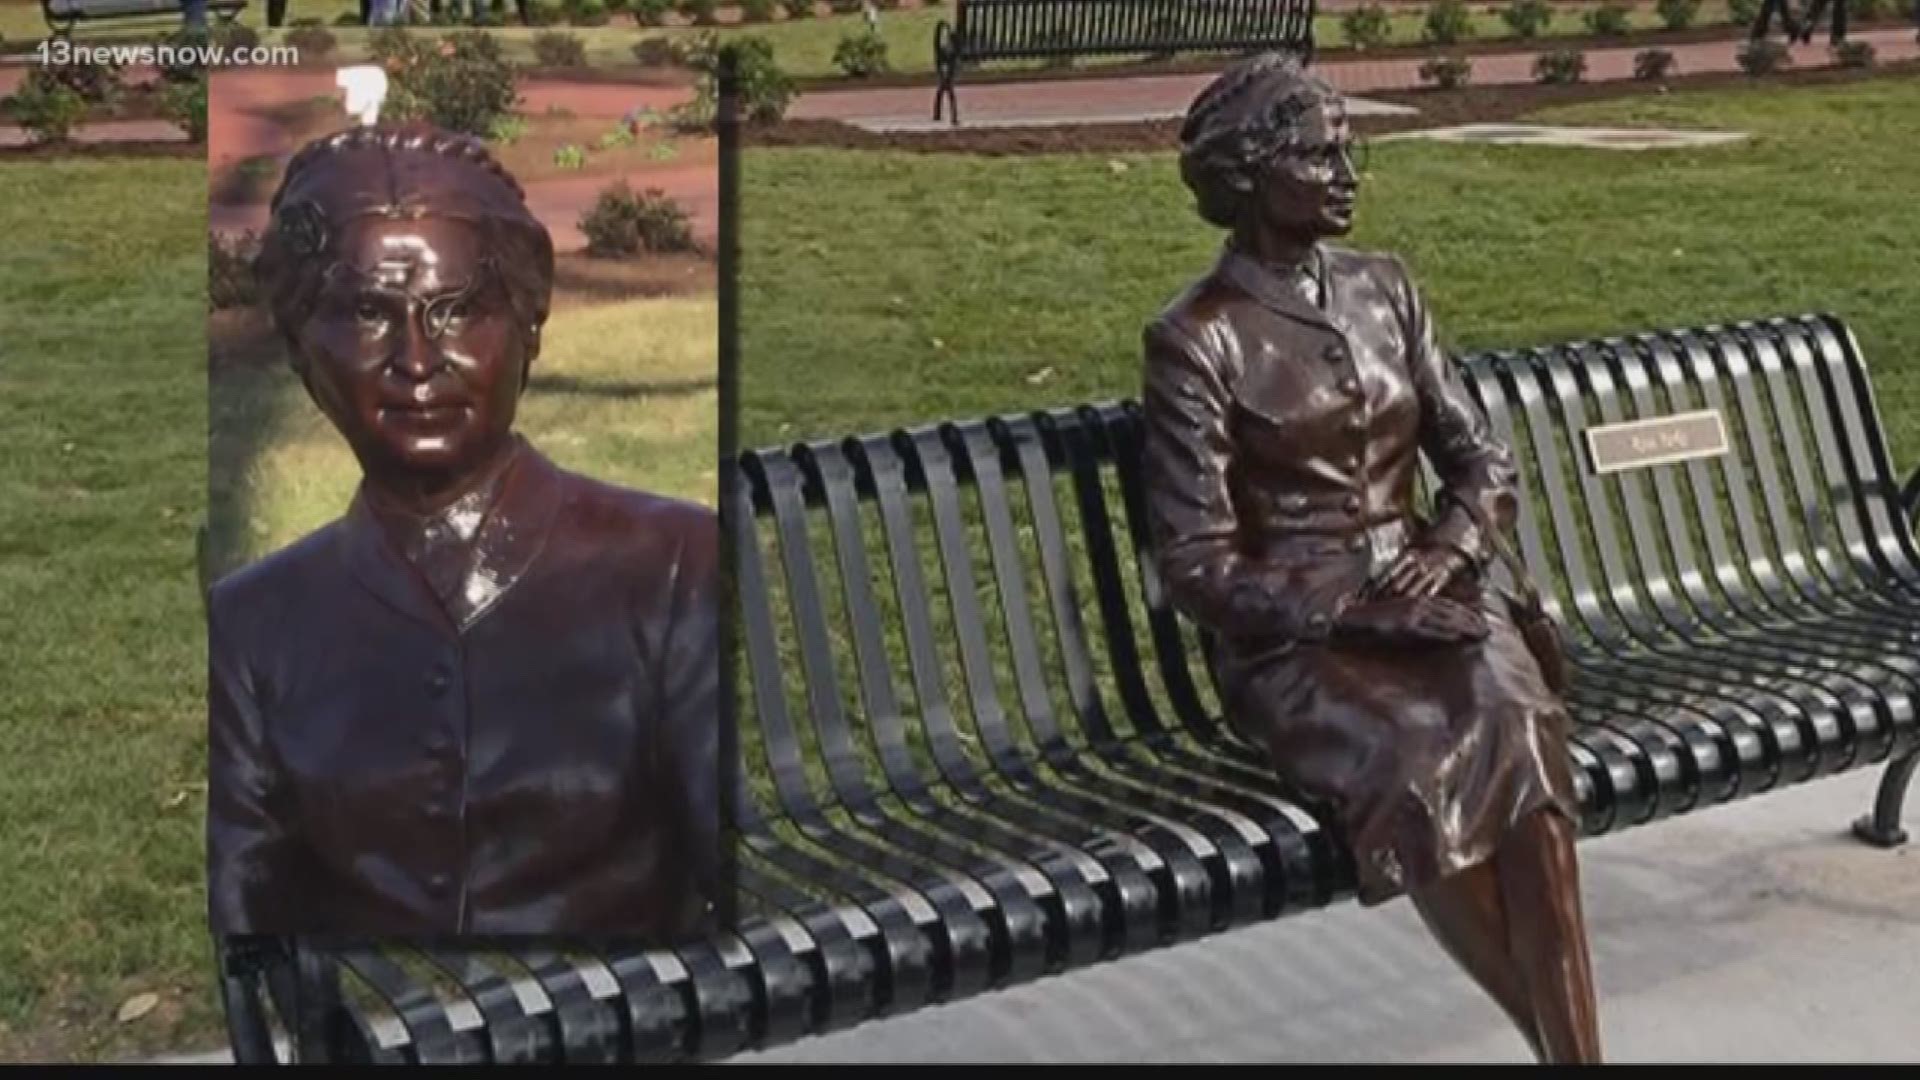 There is controversy at Hampton University after the Rosa Parks statue was vandalized.